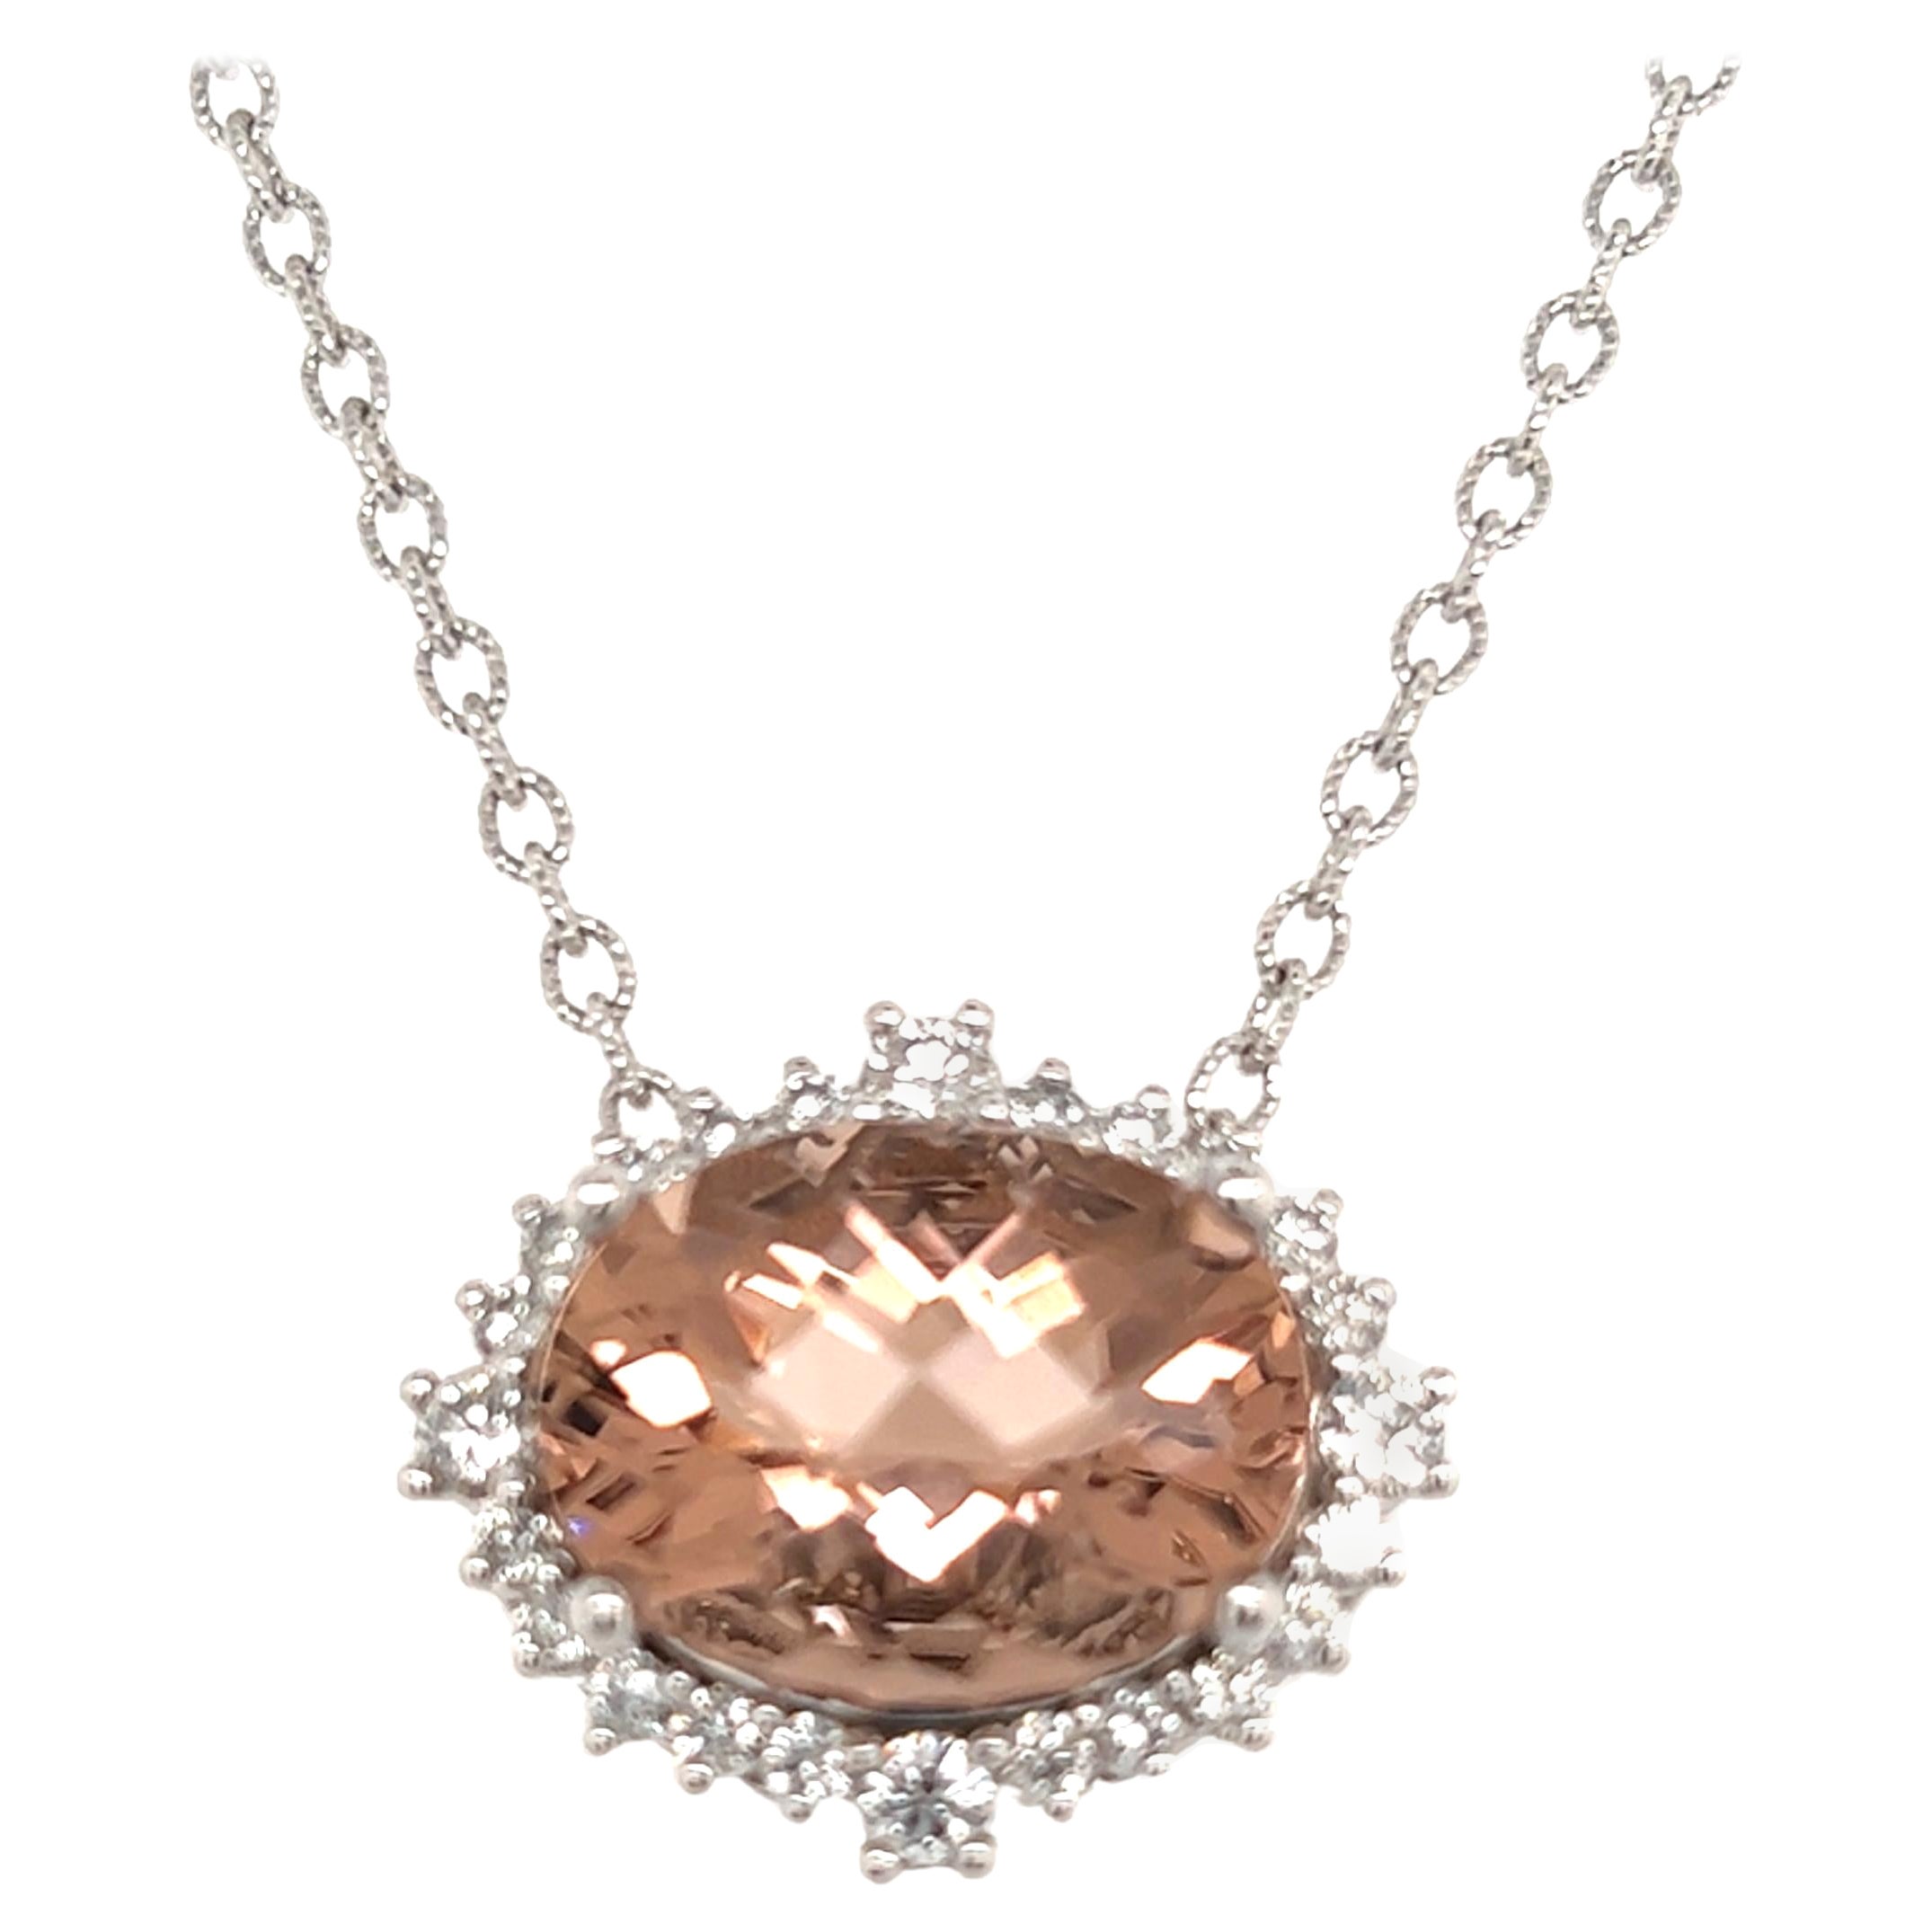 Natural Morganite Diamond Necklace 14k Gold 10.67 TCW Certified For Sale